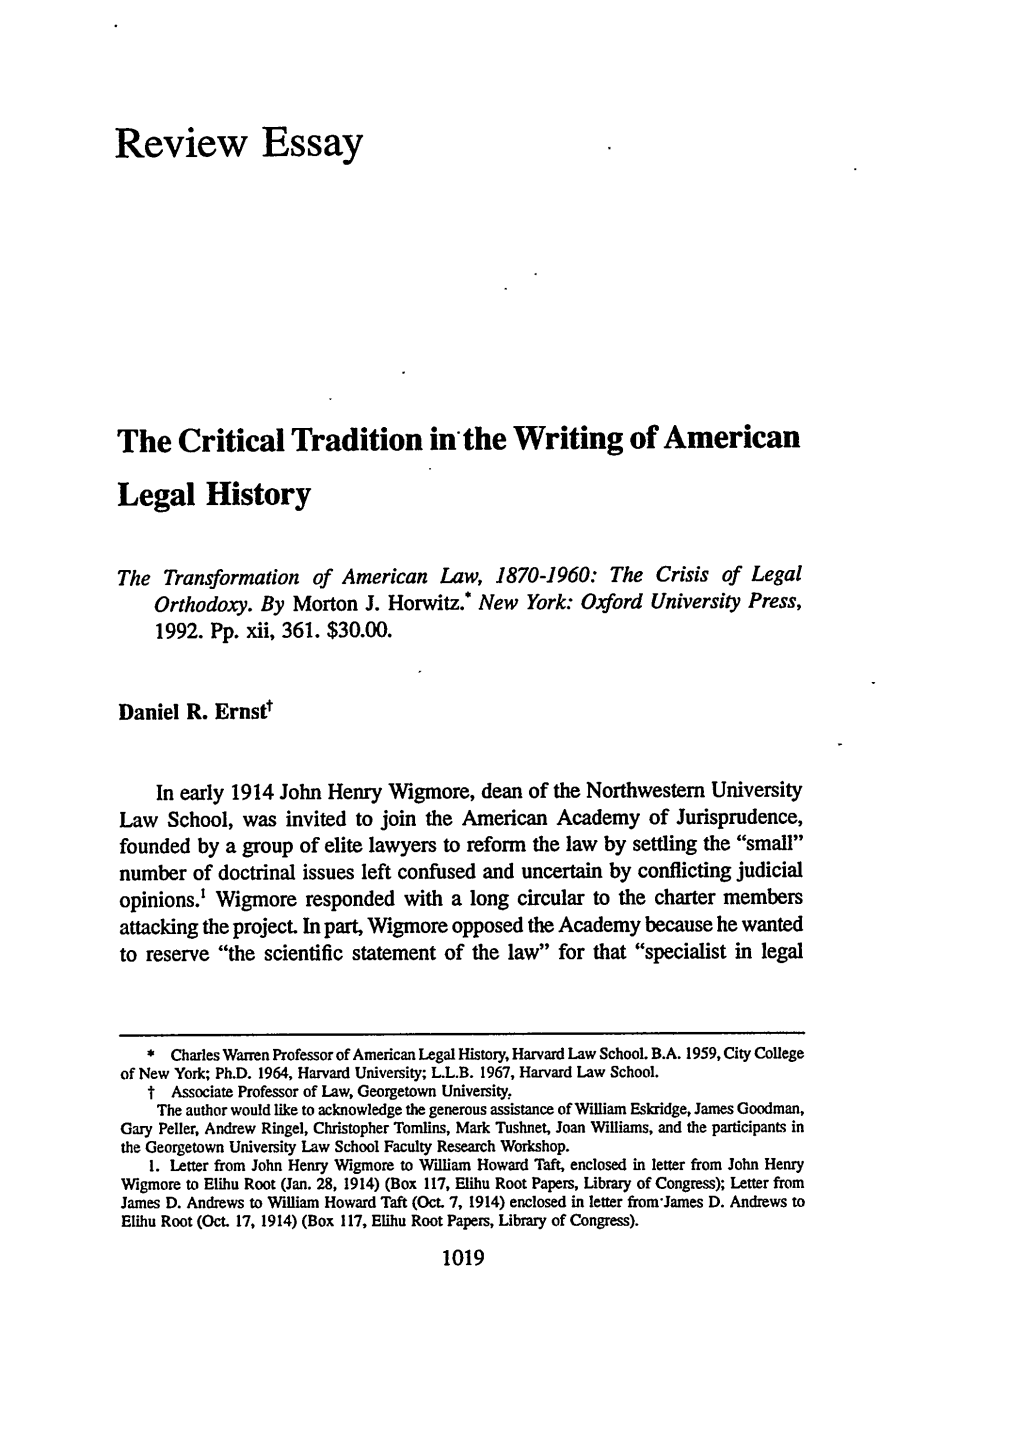 The Critical Tradition in the Writing of American Legal History